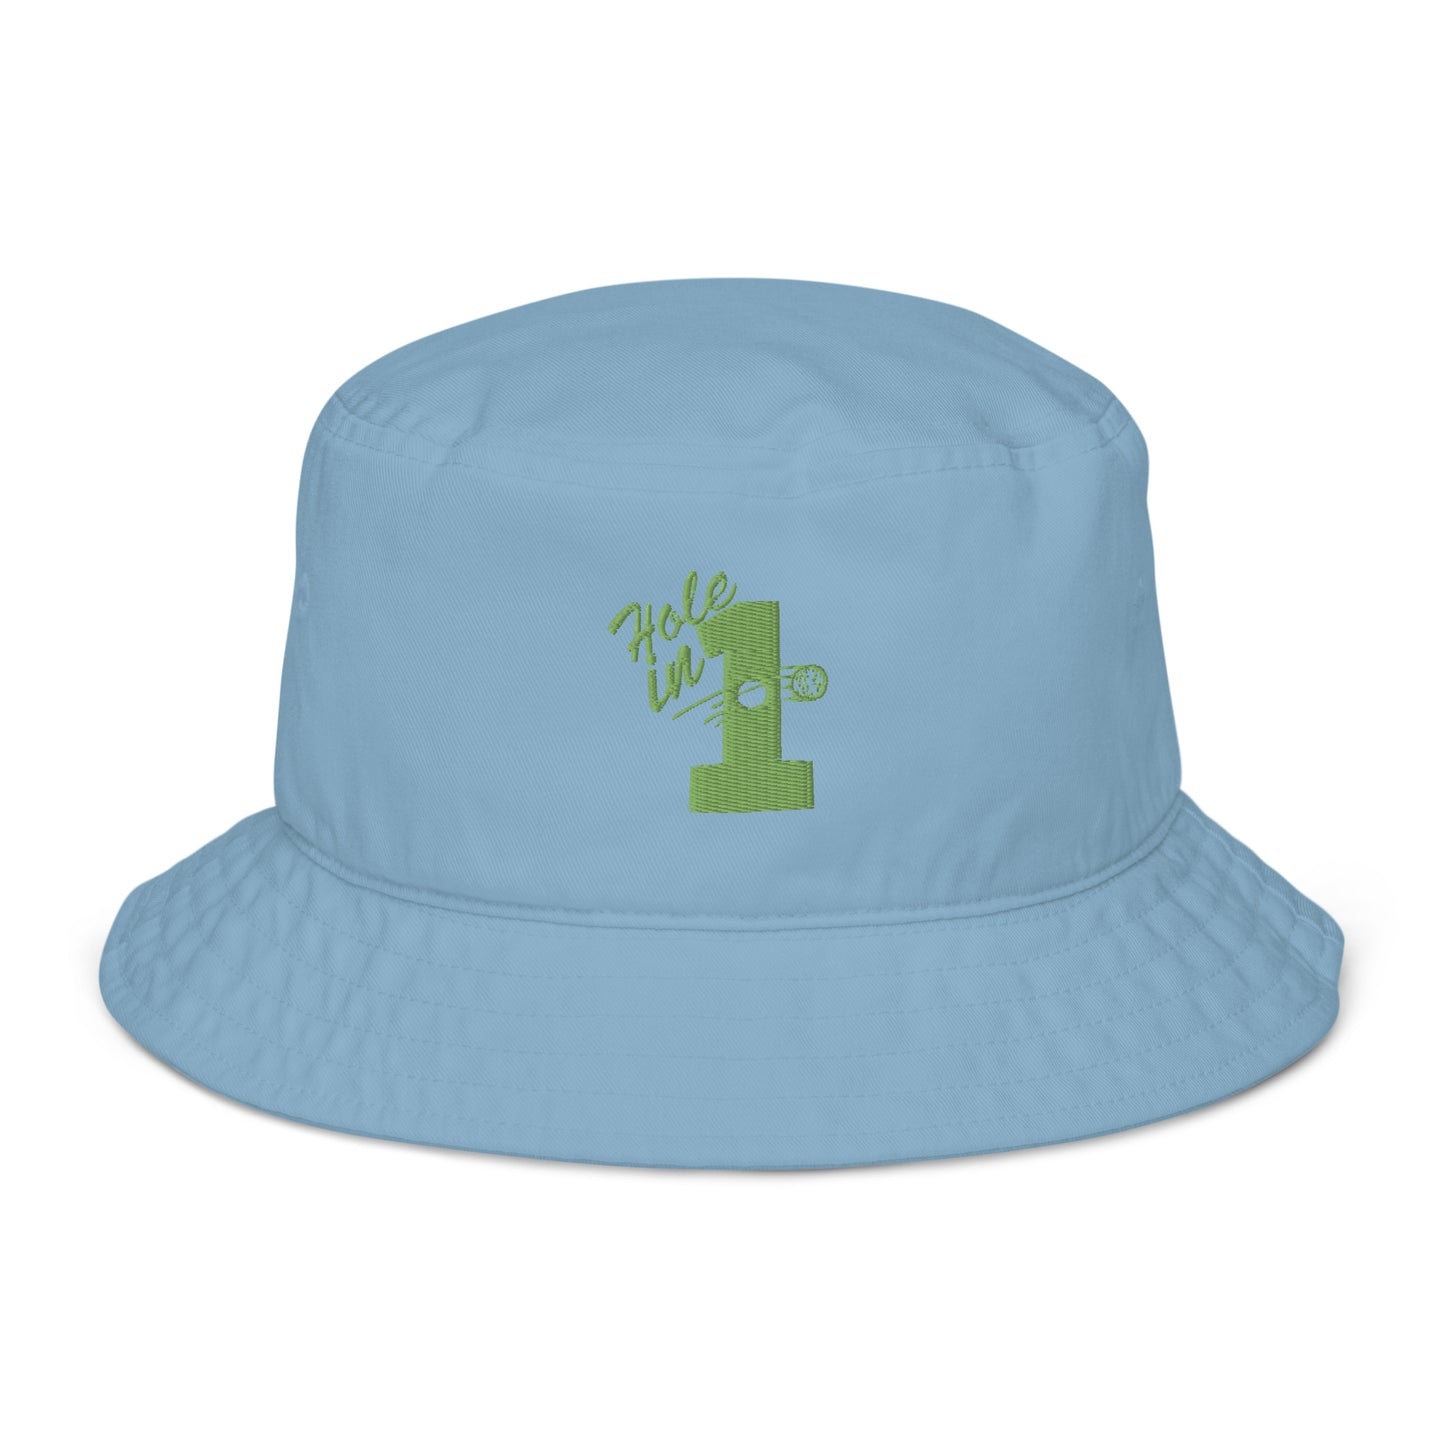 The "Hole in One" in Green Eco Bucket Hat